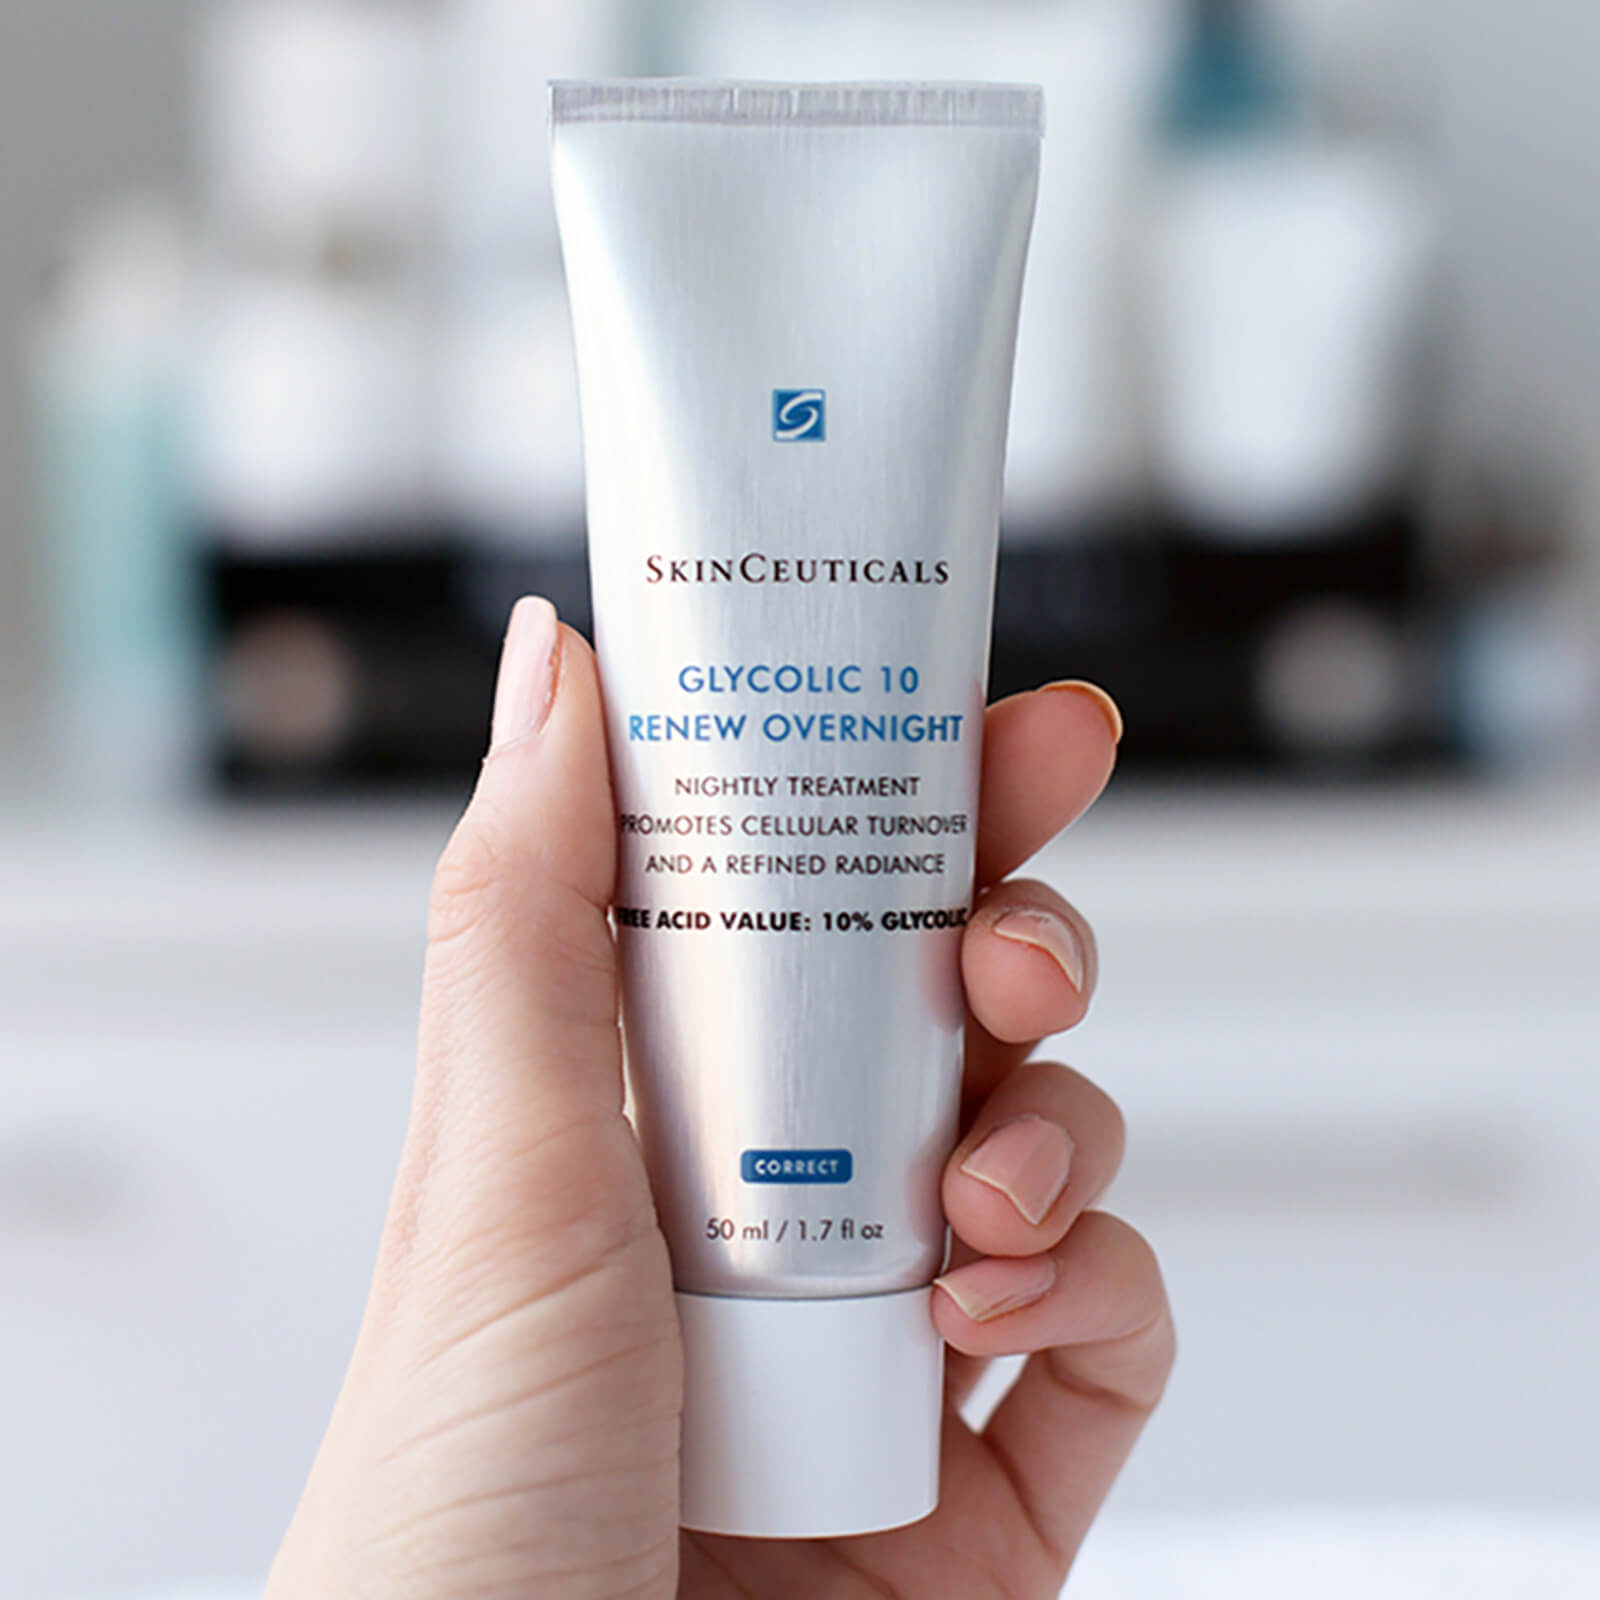 SkinCeuticals SkinCeuticals | Glycolic 10 Renew Overnight - SkinShop